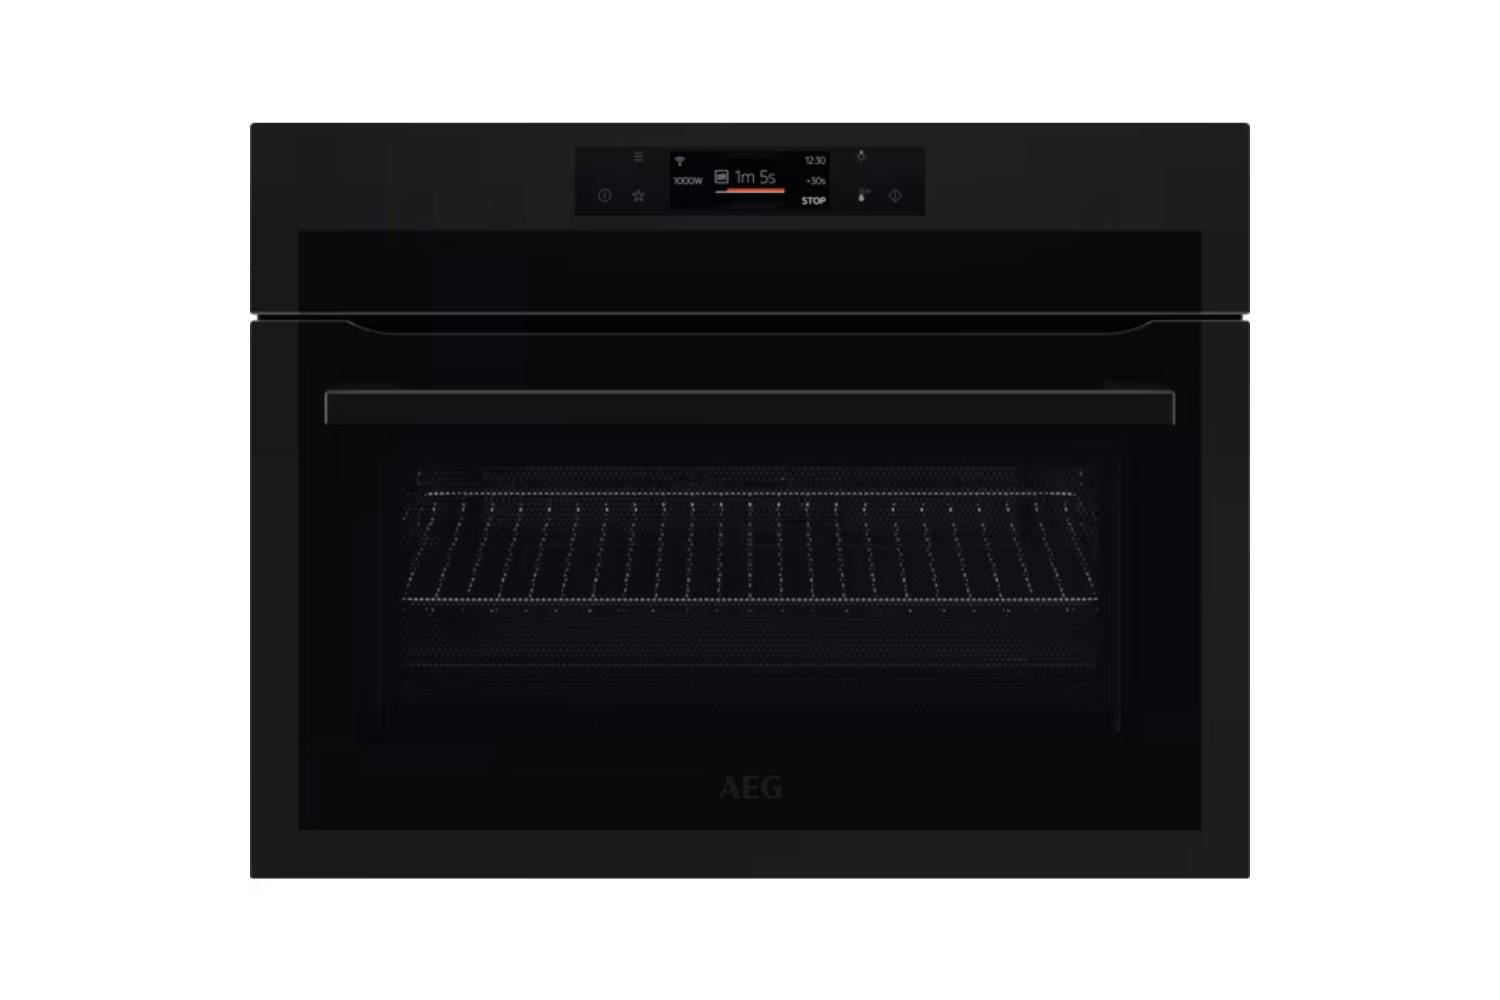 AEG 8000 Series Built-in Single Integrated CombiQuick Microwave Oven | KME768080T | Matte Black